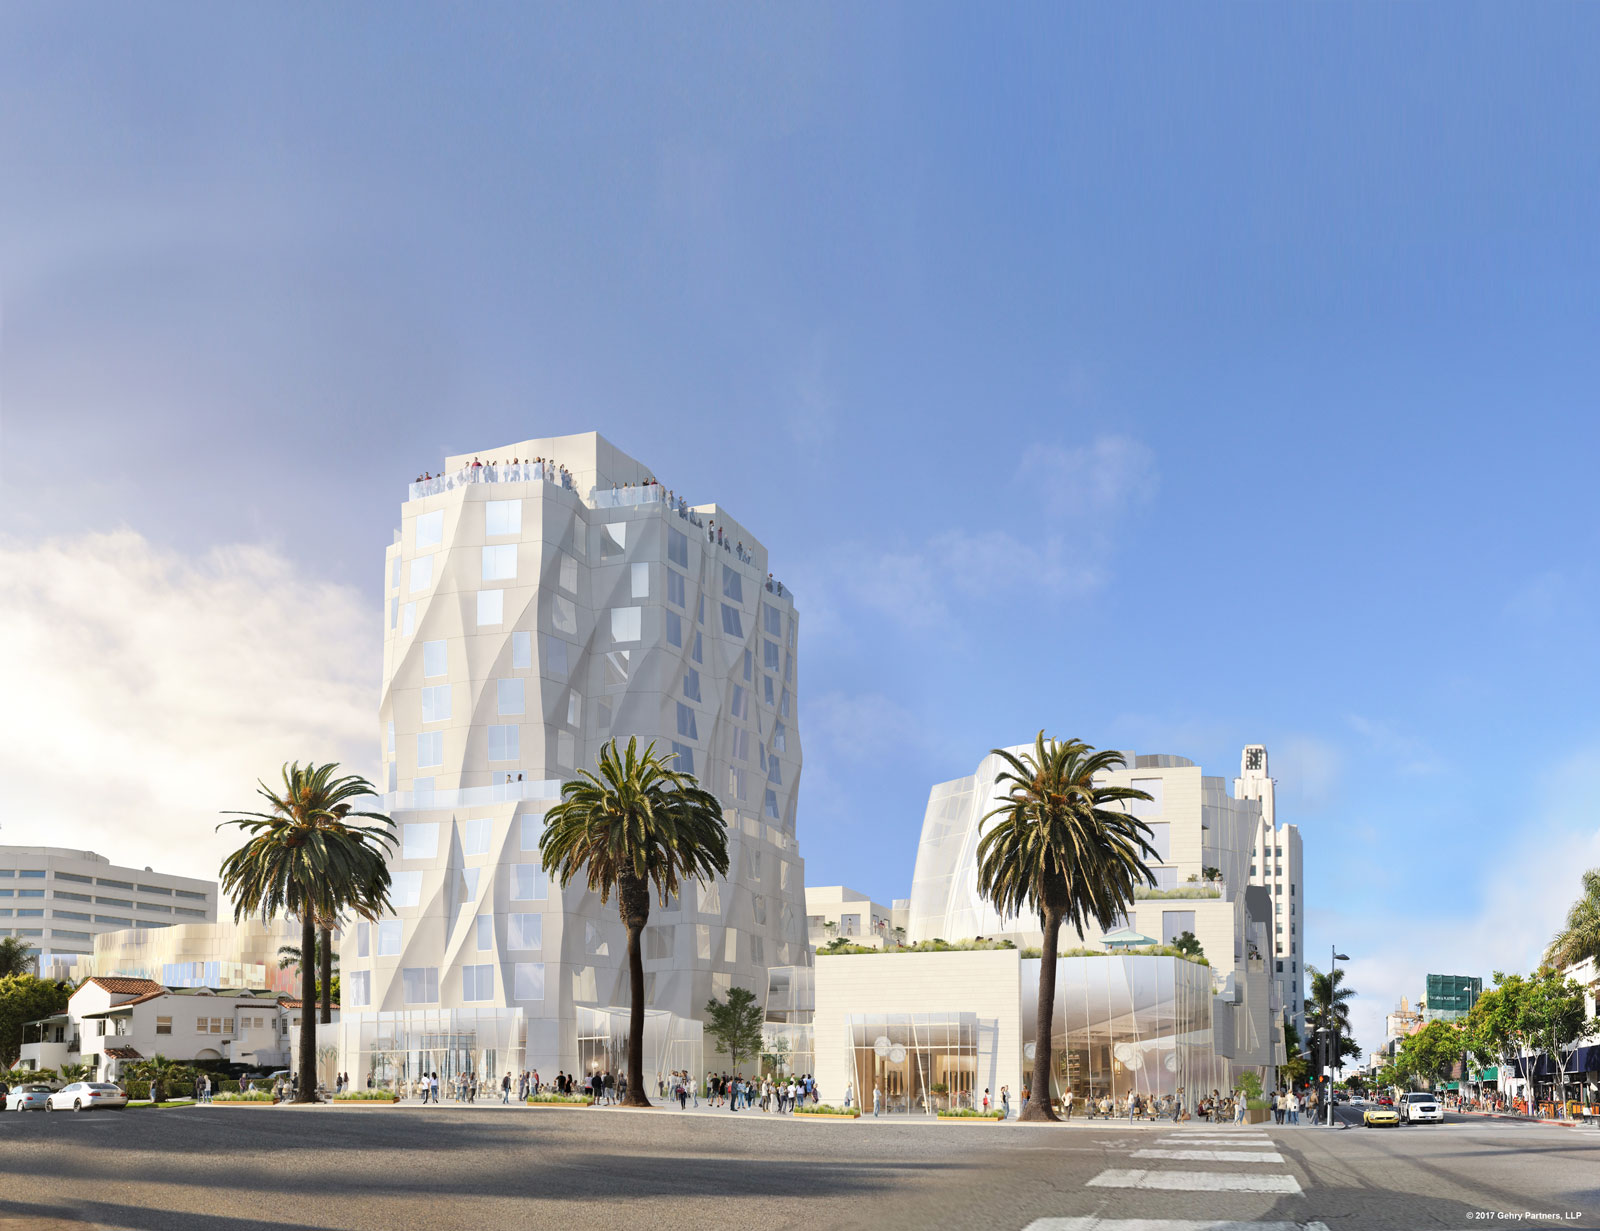 Frank Gehry halves Santa Monica hotel to meet height restrictions.